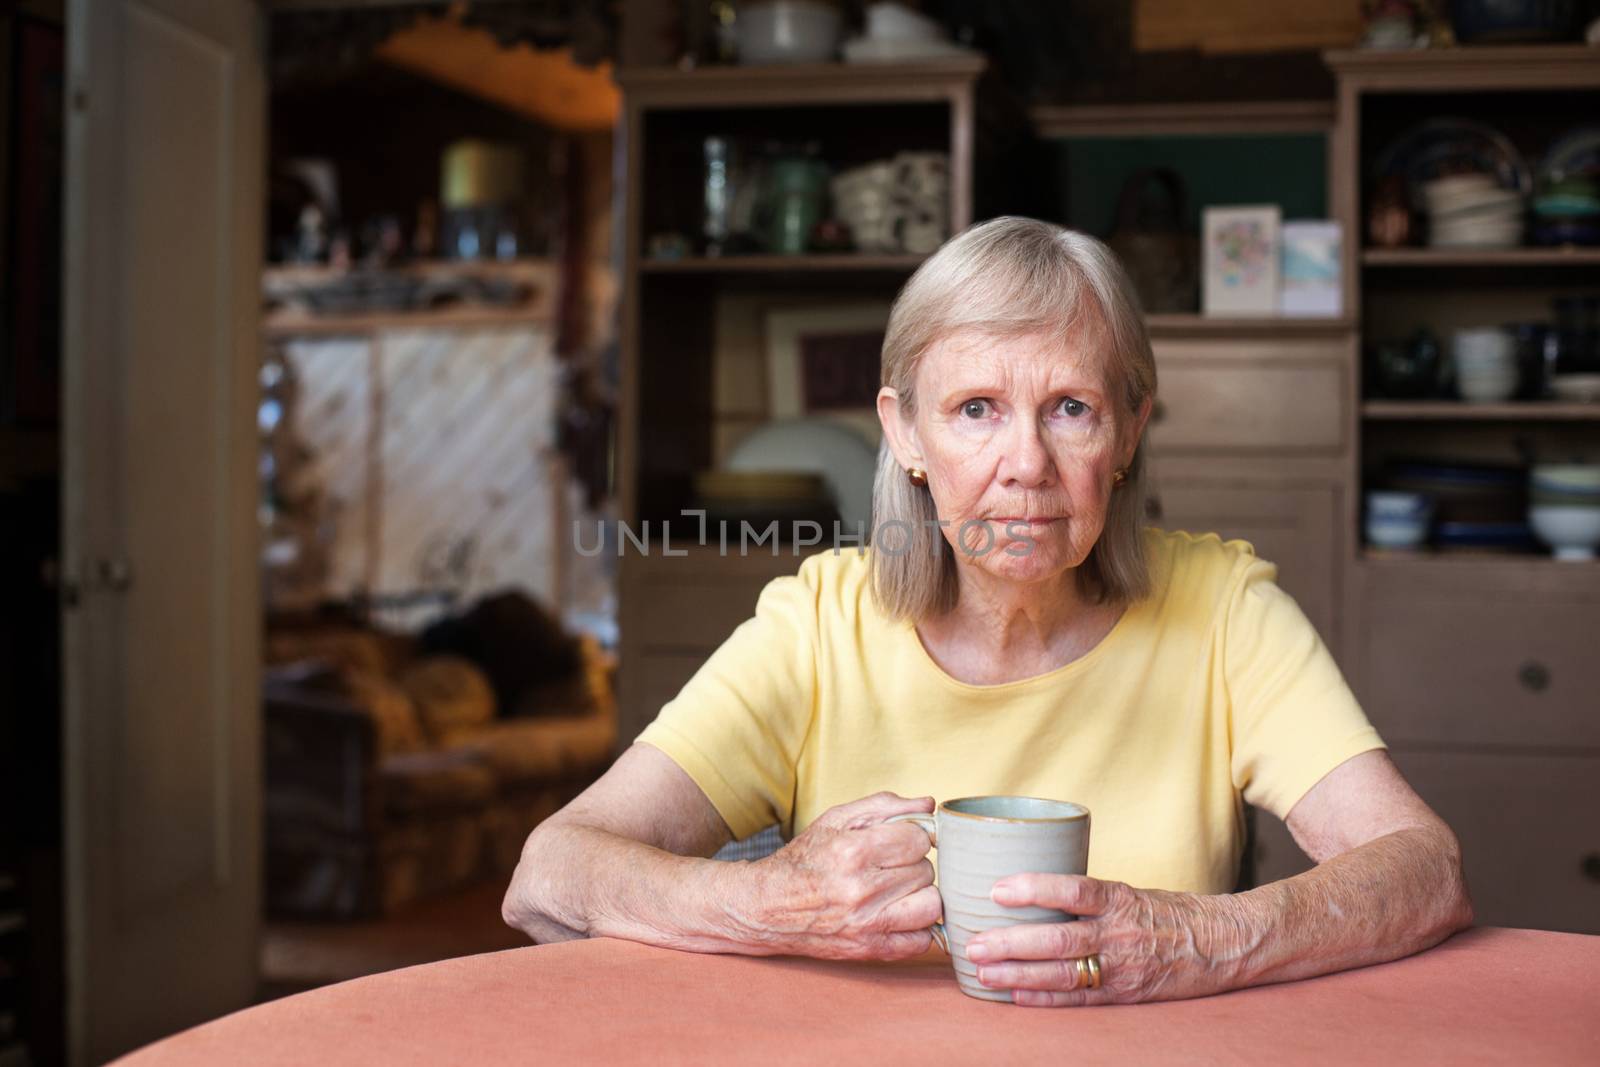 Frustrated single senior woman in yellow shirt holding cup while seated at table